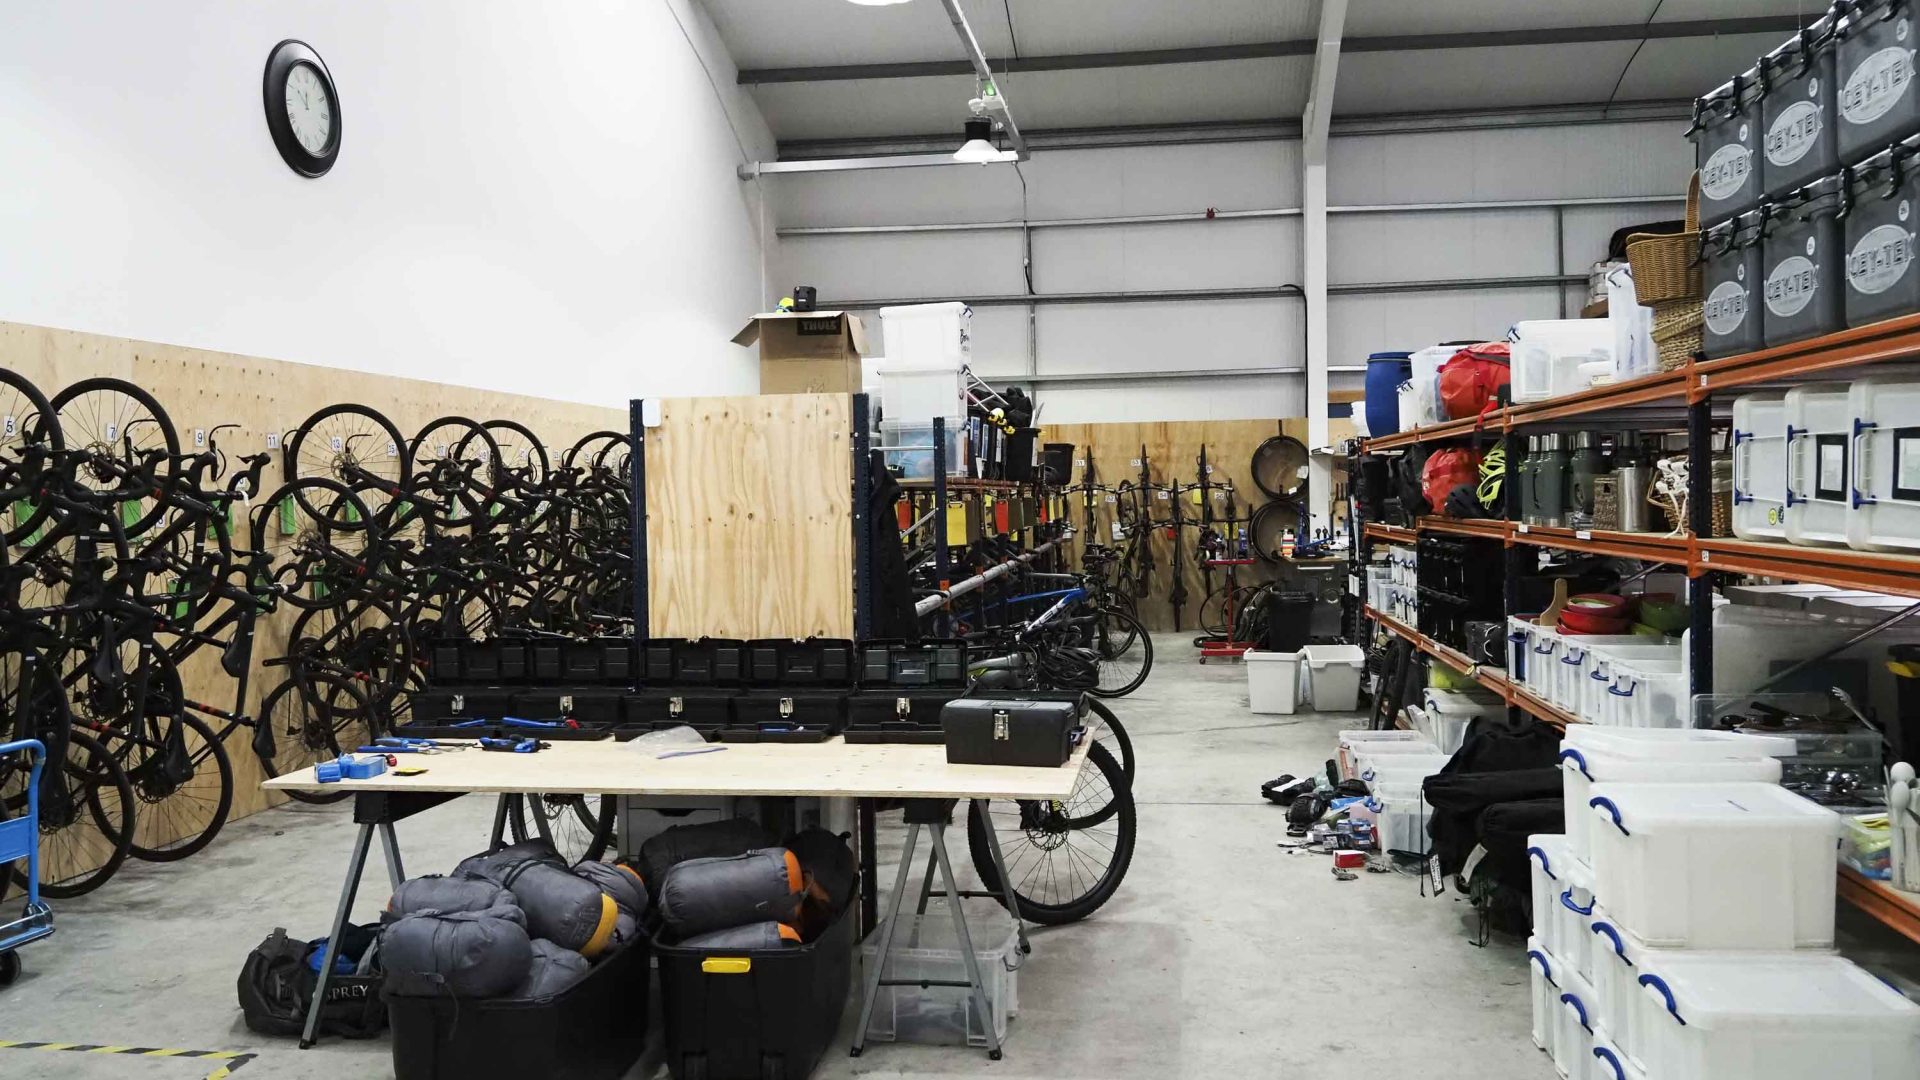 A room full of bicycles.